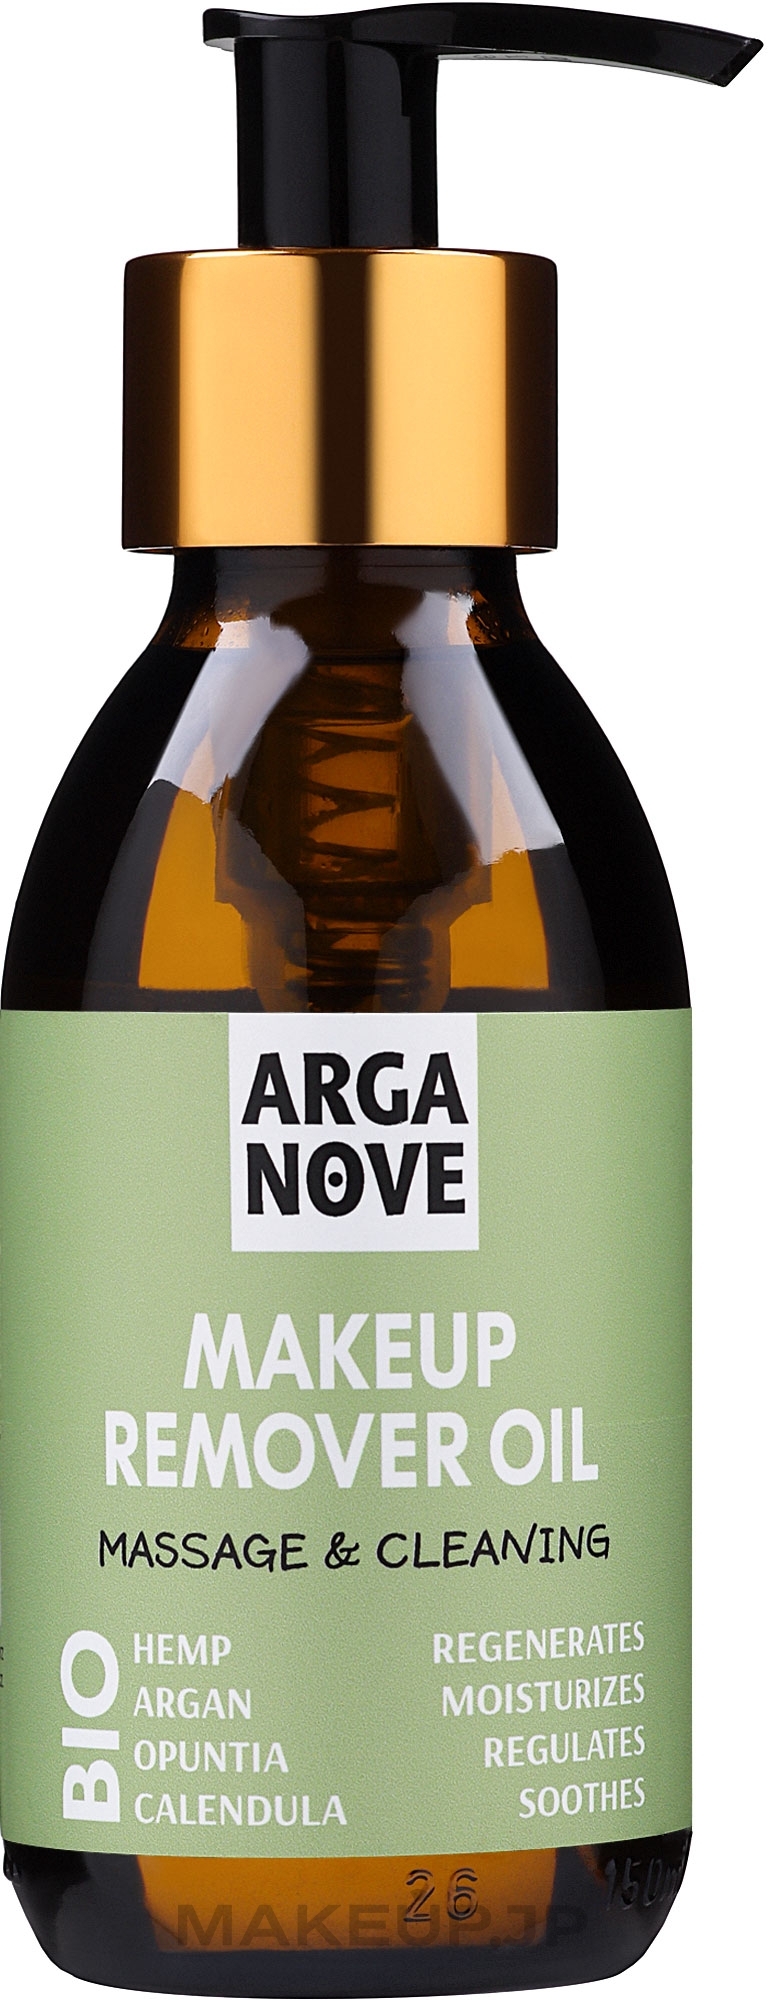 Makeup Remover & Face Massage Oil - Arganove Makeup Remover Oil Massage & Cleaning — photo 150 ml